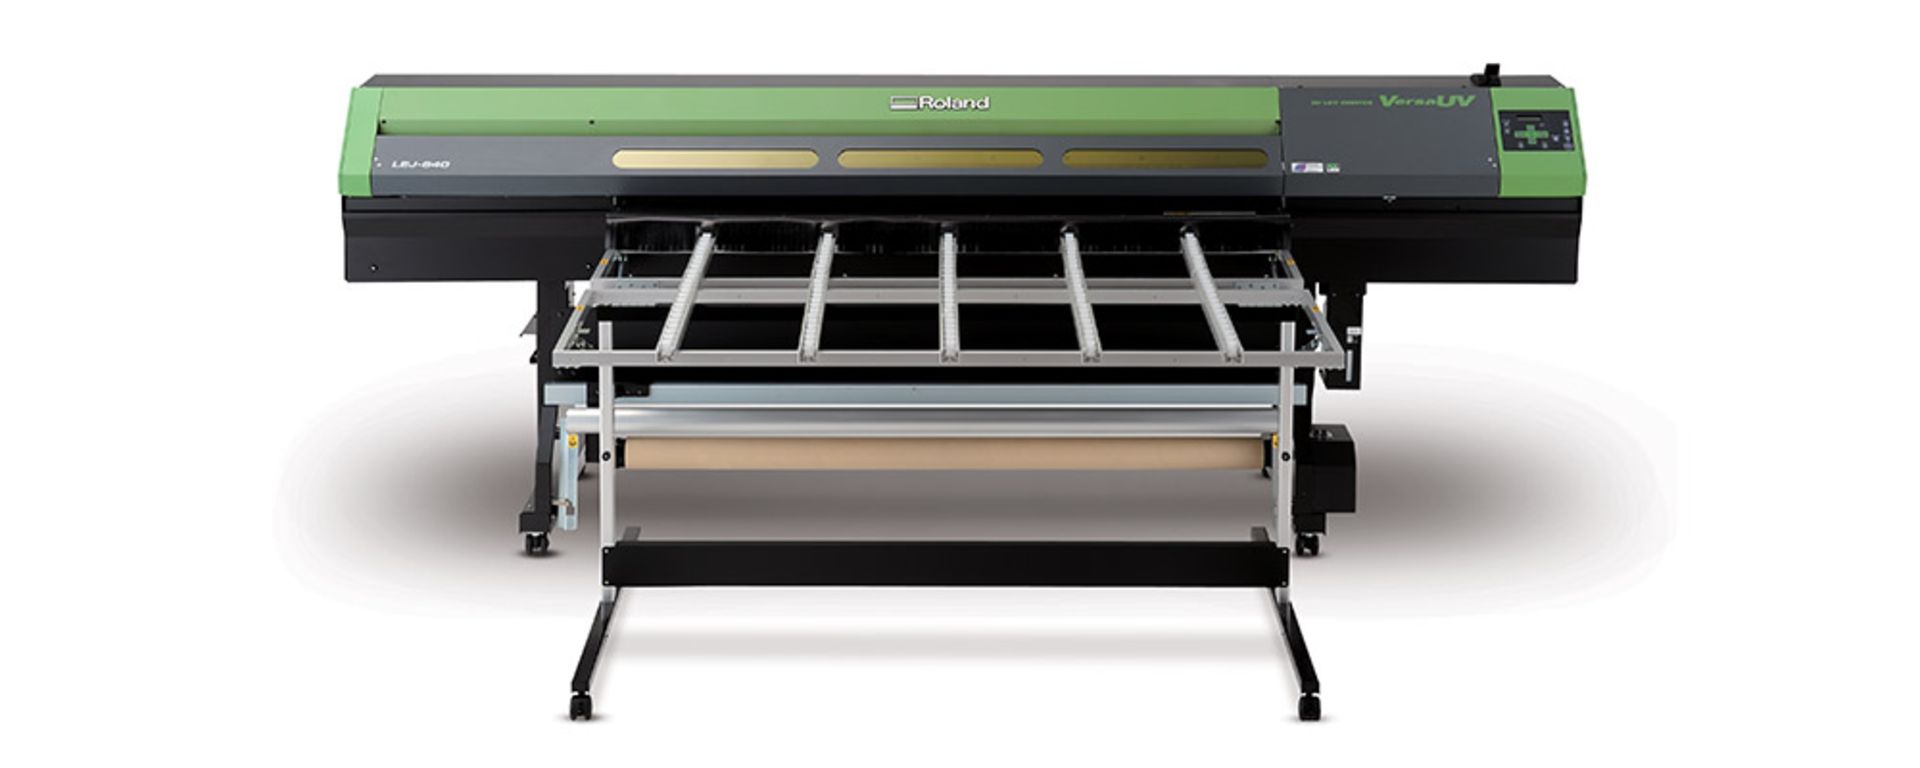 ROLAND LEJ-640 HYBRID ROLL TO ROLL AND FLATBED UV PRINTER WITH REMOVABLE TABLES (R10) - Image 4 of 4